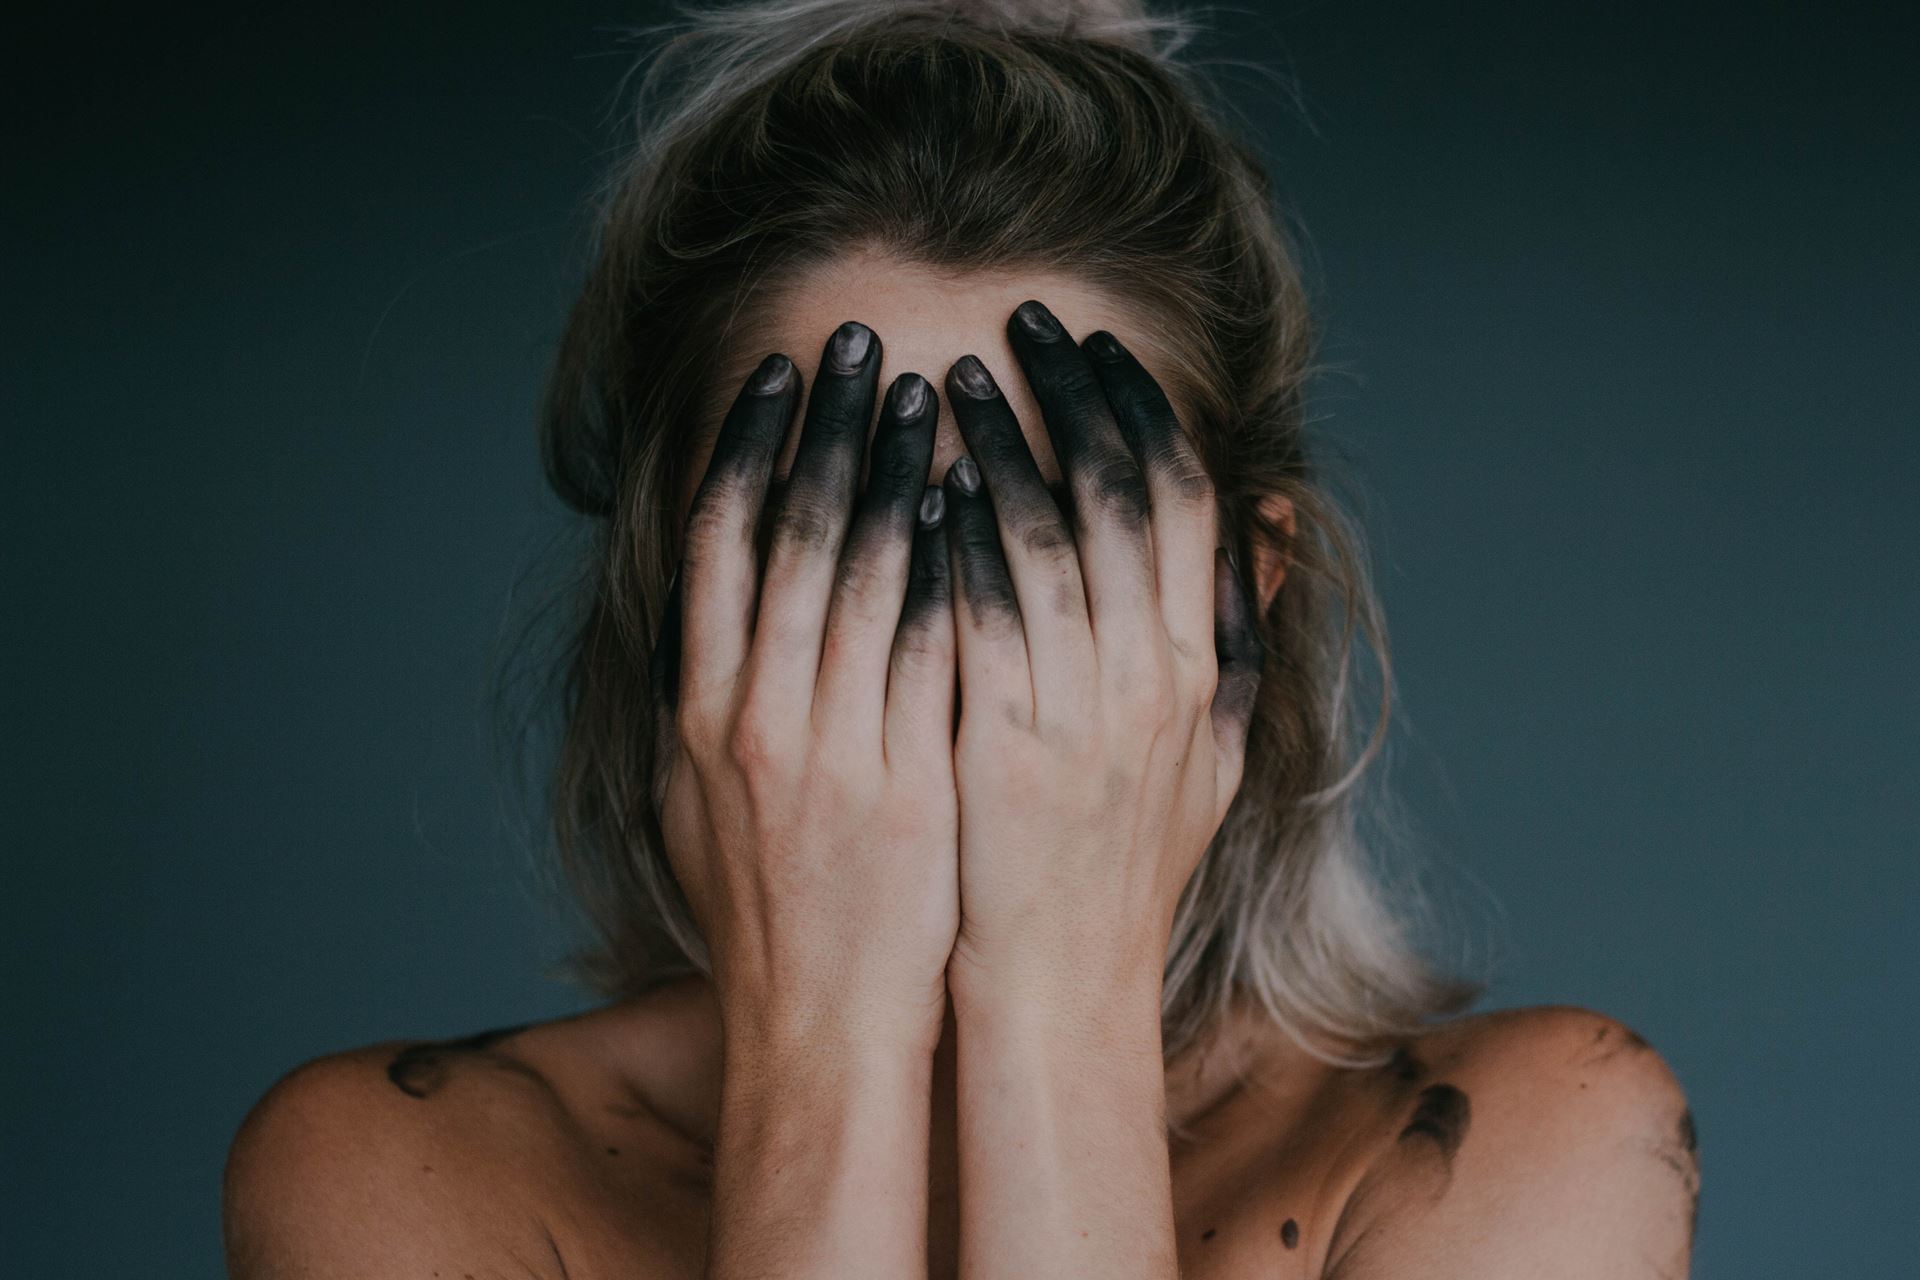 a woman covering her face with her hands